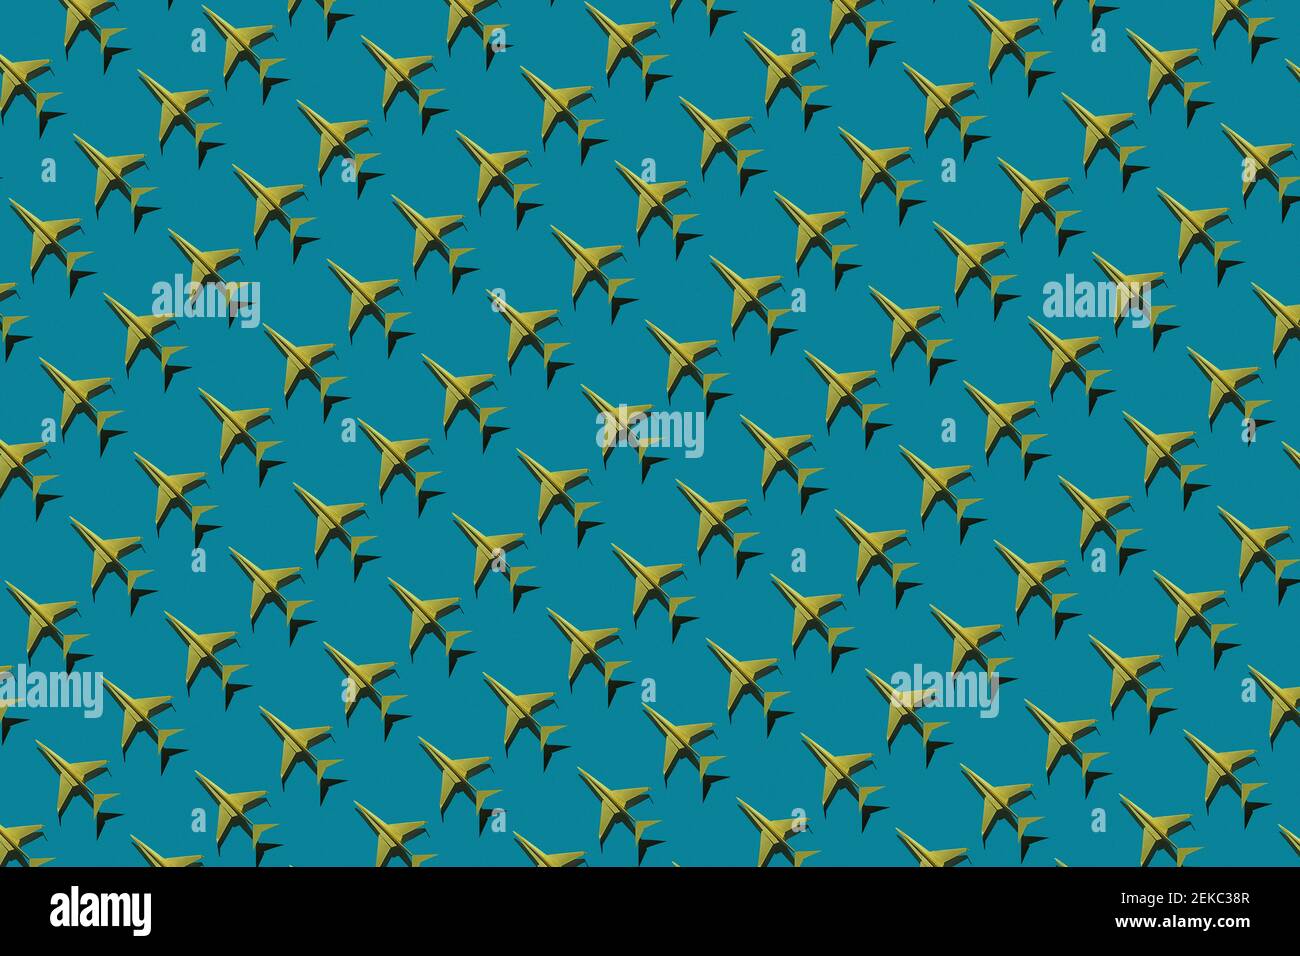 Pattern of yellow origami airplanes Stock Photo